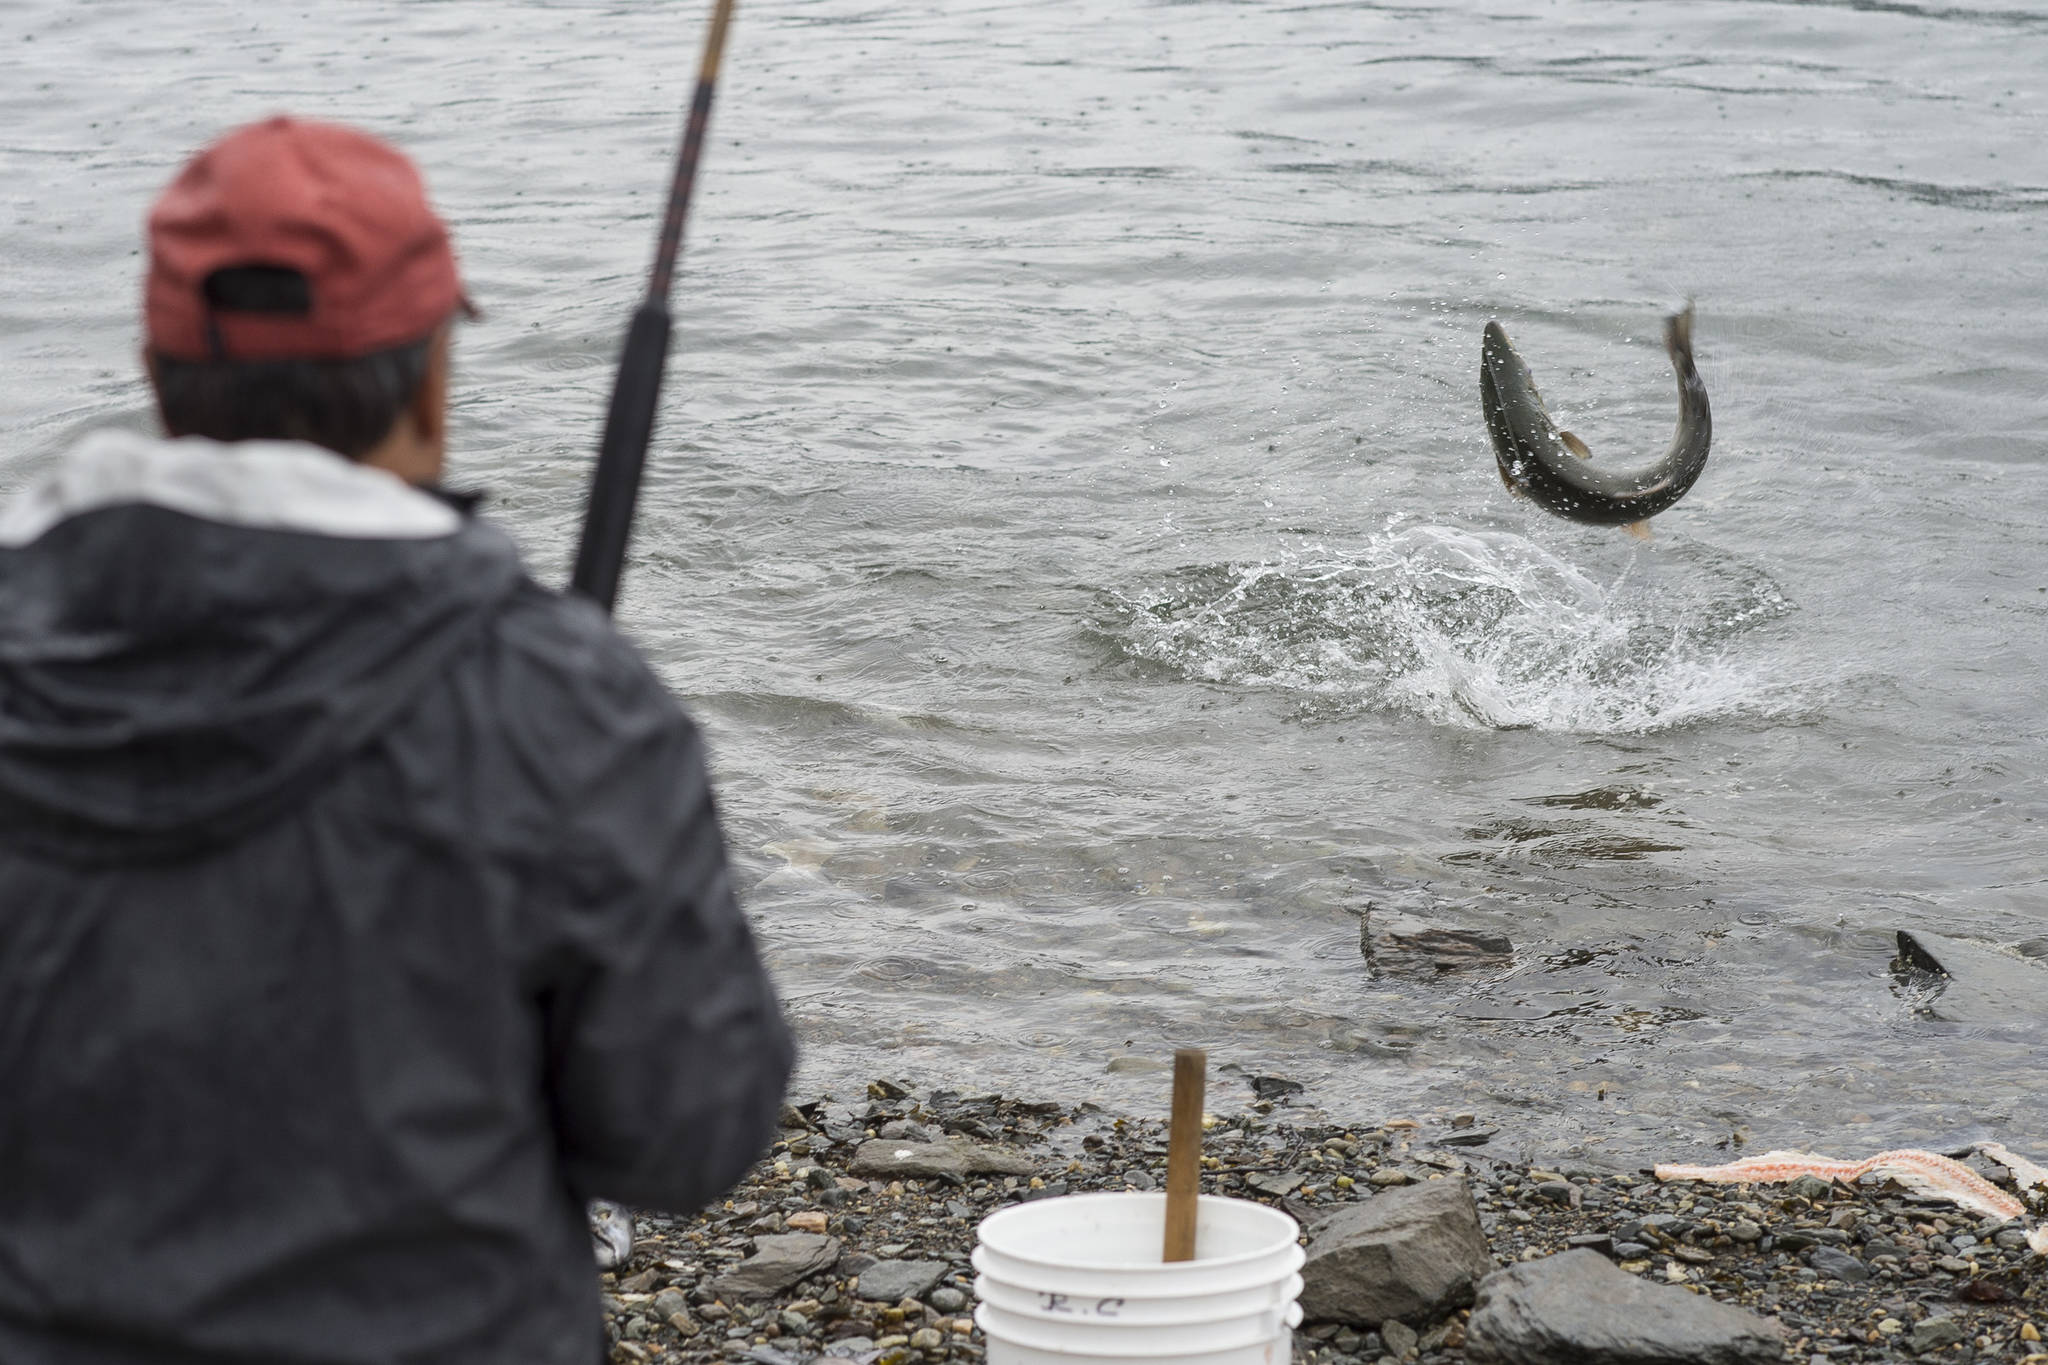 Roger Castillo watches as a coho salmon he caught leaps he fishes at the Wayside Park on Channel Drive on Friday, Sept. 7, 2018. The Alaska Department of Fish and Game has increased the limit to 12 coho salmon in the designated saltwater hatchery sport harvest area due to the large number of returning hatchery coho salmon in excess of broodstock needs. (Michael Penn | Juneau Empire)